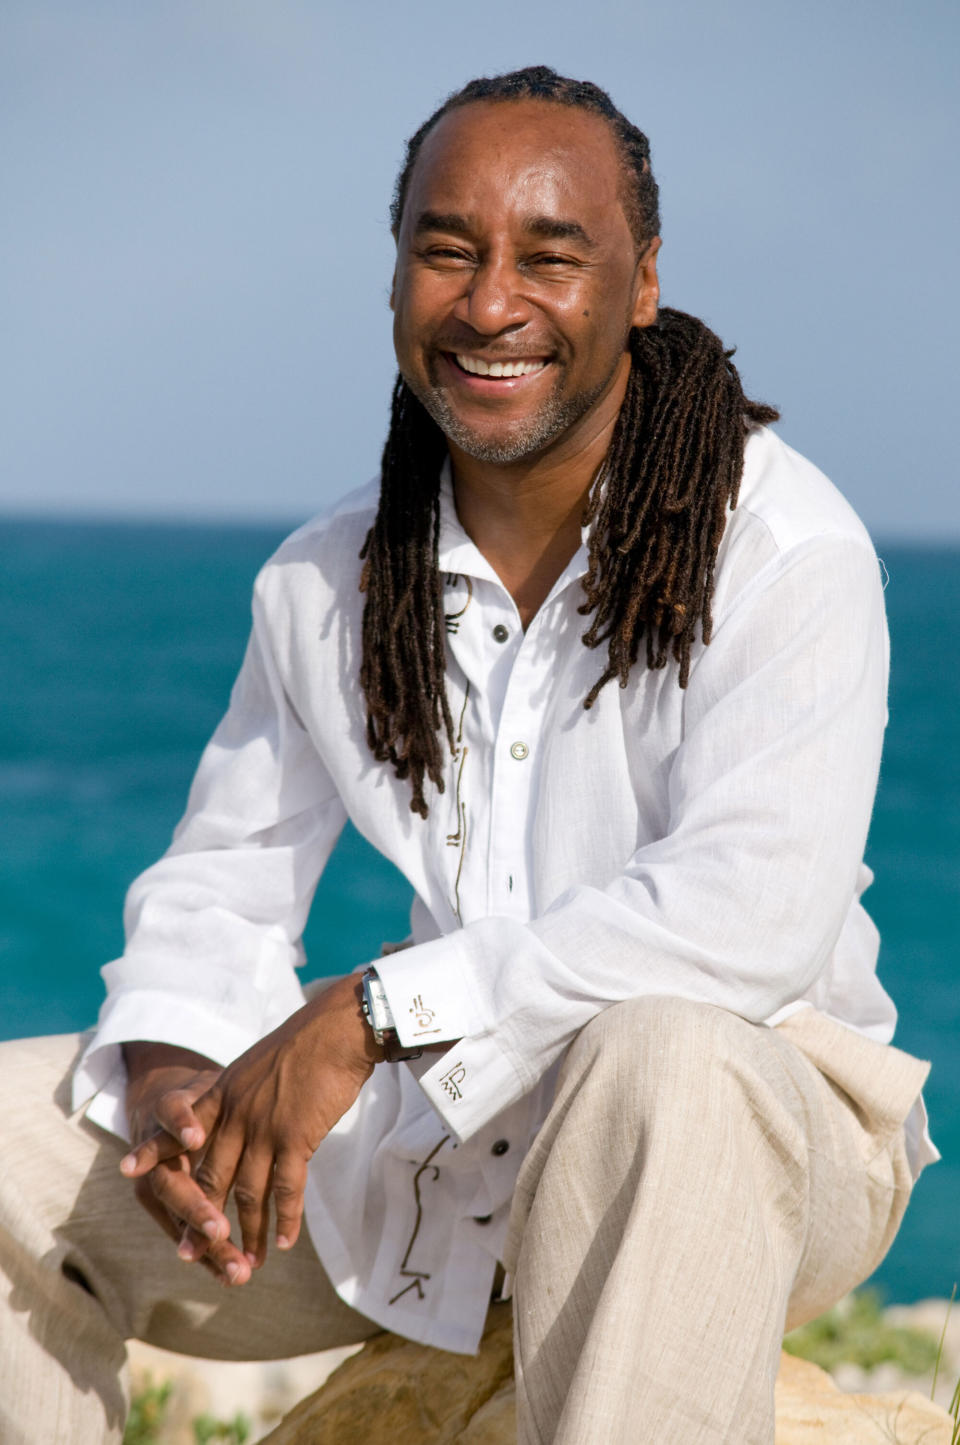 This undated image released by Joseph Jones shows author Eric Jerome Dickey in Antigua. Dickey, the bestselling novelist who blended crime, romance and eroticism in “Sister, Sister,” “Waking With Enemies” and dozens of other stories about contemporary Black life, has died at age 59. Dickey's publicist at Penguin Random House, Emily Canders, told The Associated Press that the author died Sunday, Jan. 3, 2021 in Los Angeles after a long illness. (Joseph Jones via AP)